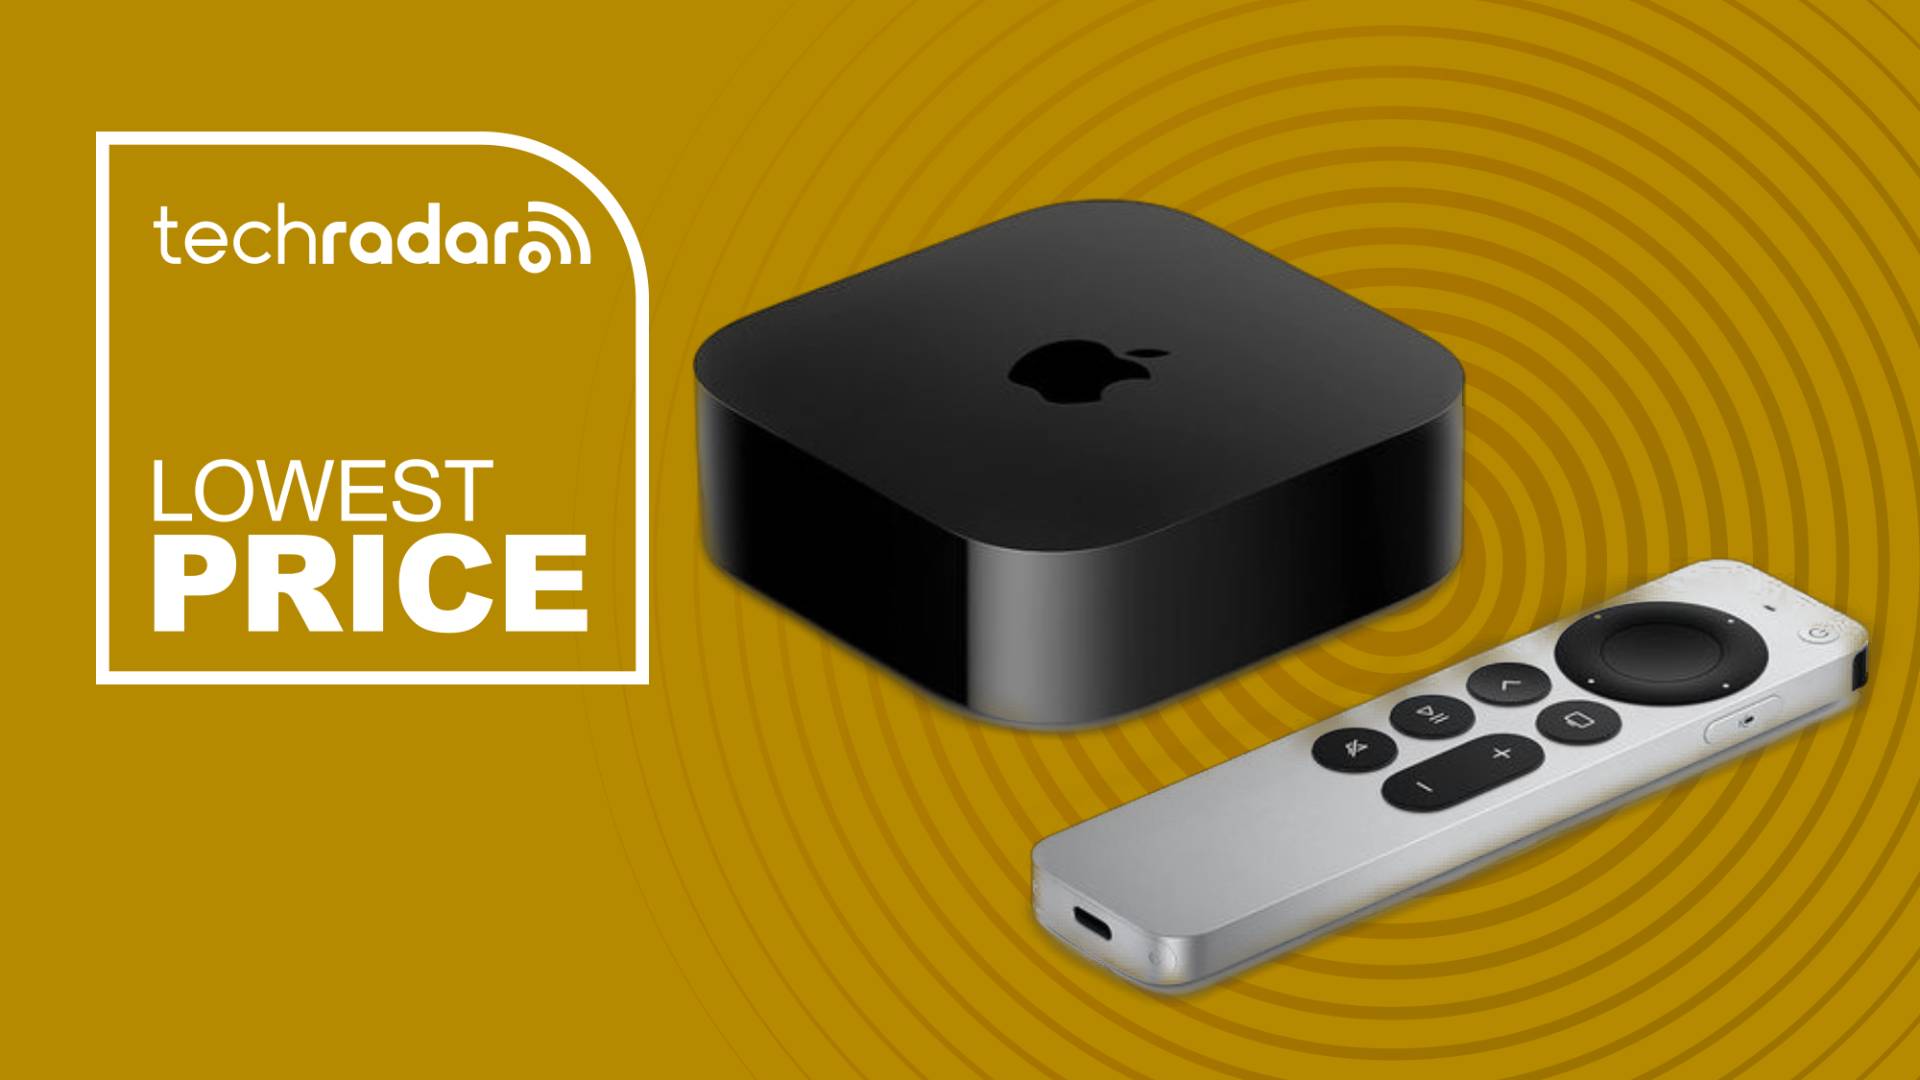 The new Apple TV 4K is the one device we're counting on this festive weekend